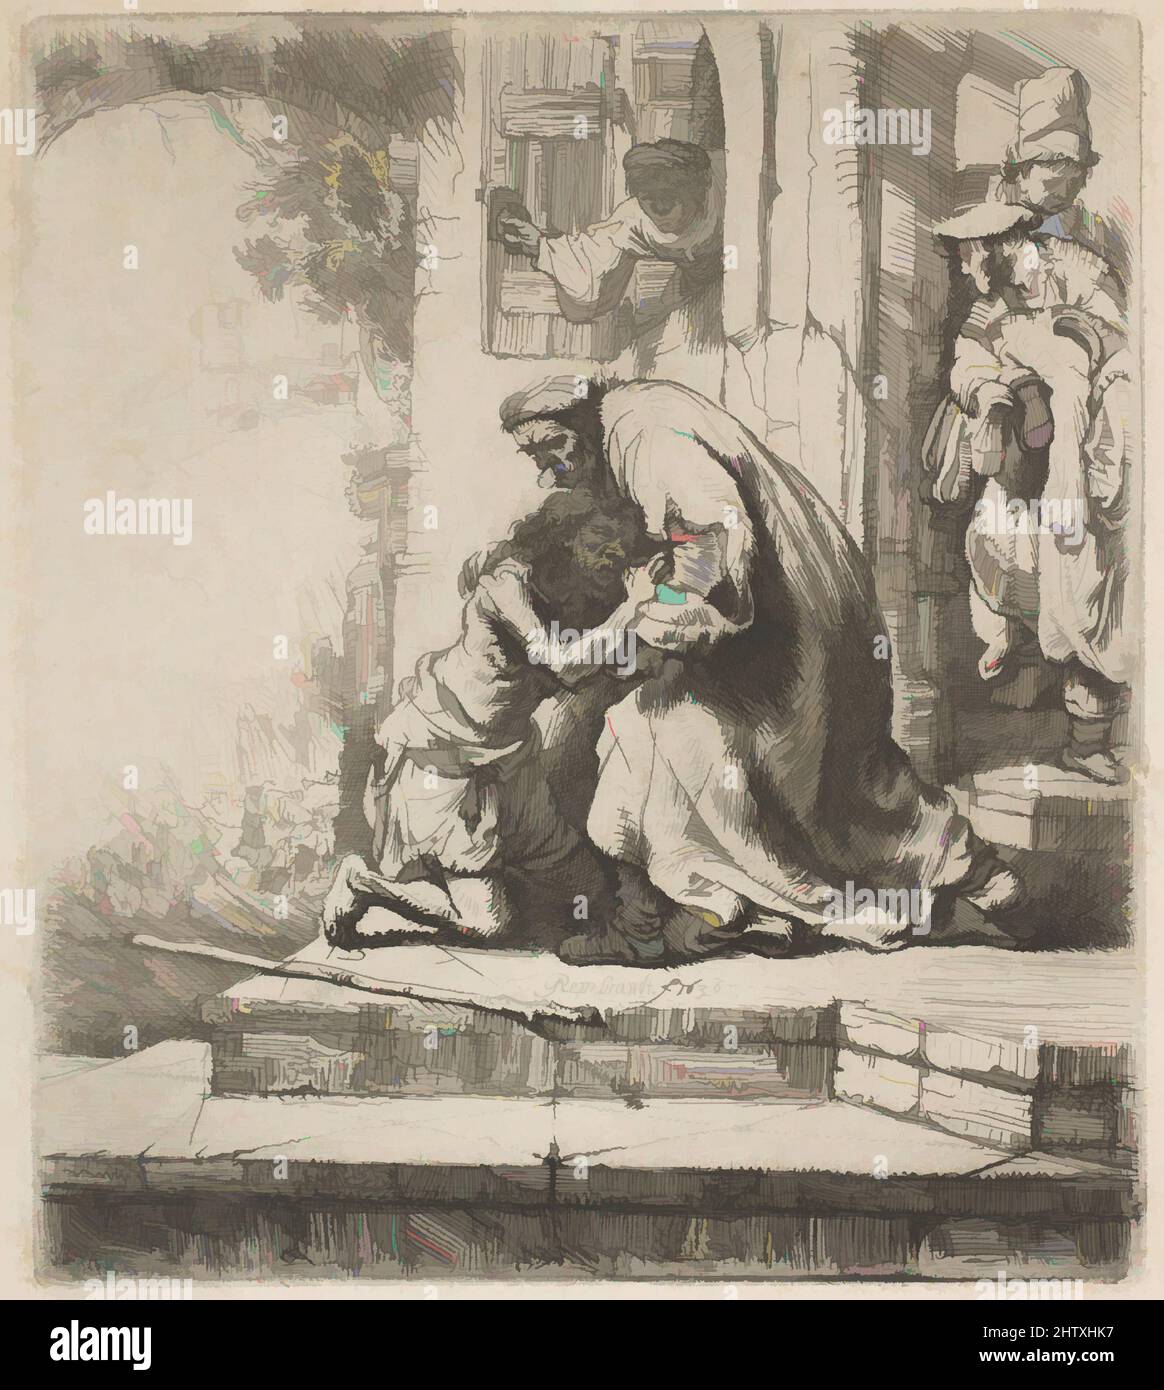 Art inspired by The Return of the Prodigal Son, 1636, Etching, Plate: 6 1/8 × 5 7/16 in. (15.6 × 13.8 cm), Prints, Rembrandt (Rembrandt van Rijn) (Dutch, Leiden 1606–1669 Amsterdam, Classic works modernized by Artotop with a splash of modernity. Shapes, color and value, eye-catching visual impact on art. Emotions through freedom of artworks in a contemporary way. A timeless message pursuing a wildly creative new direction. Artists turning to the digital medium and creating the Artotop NFT Stock Photo